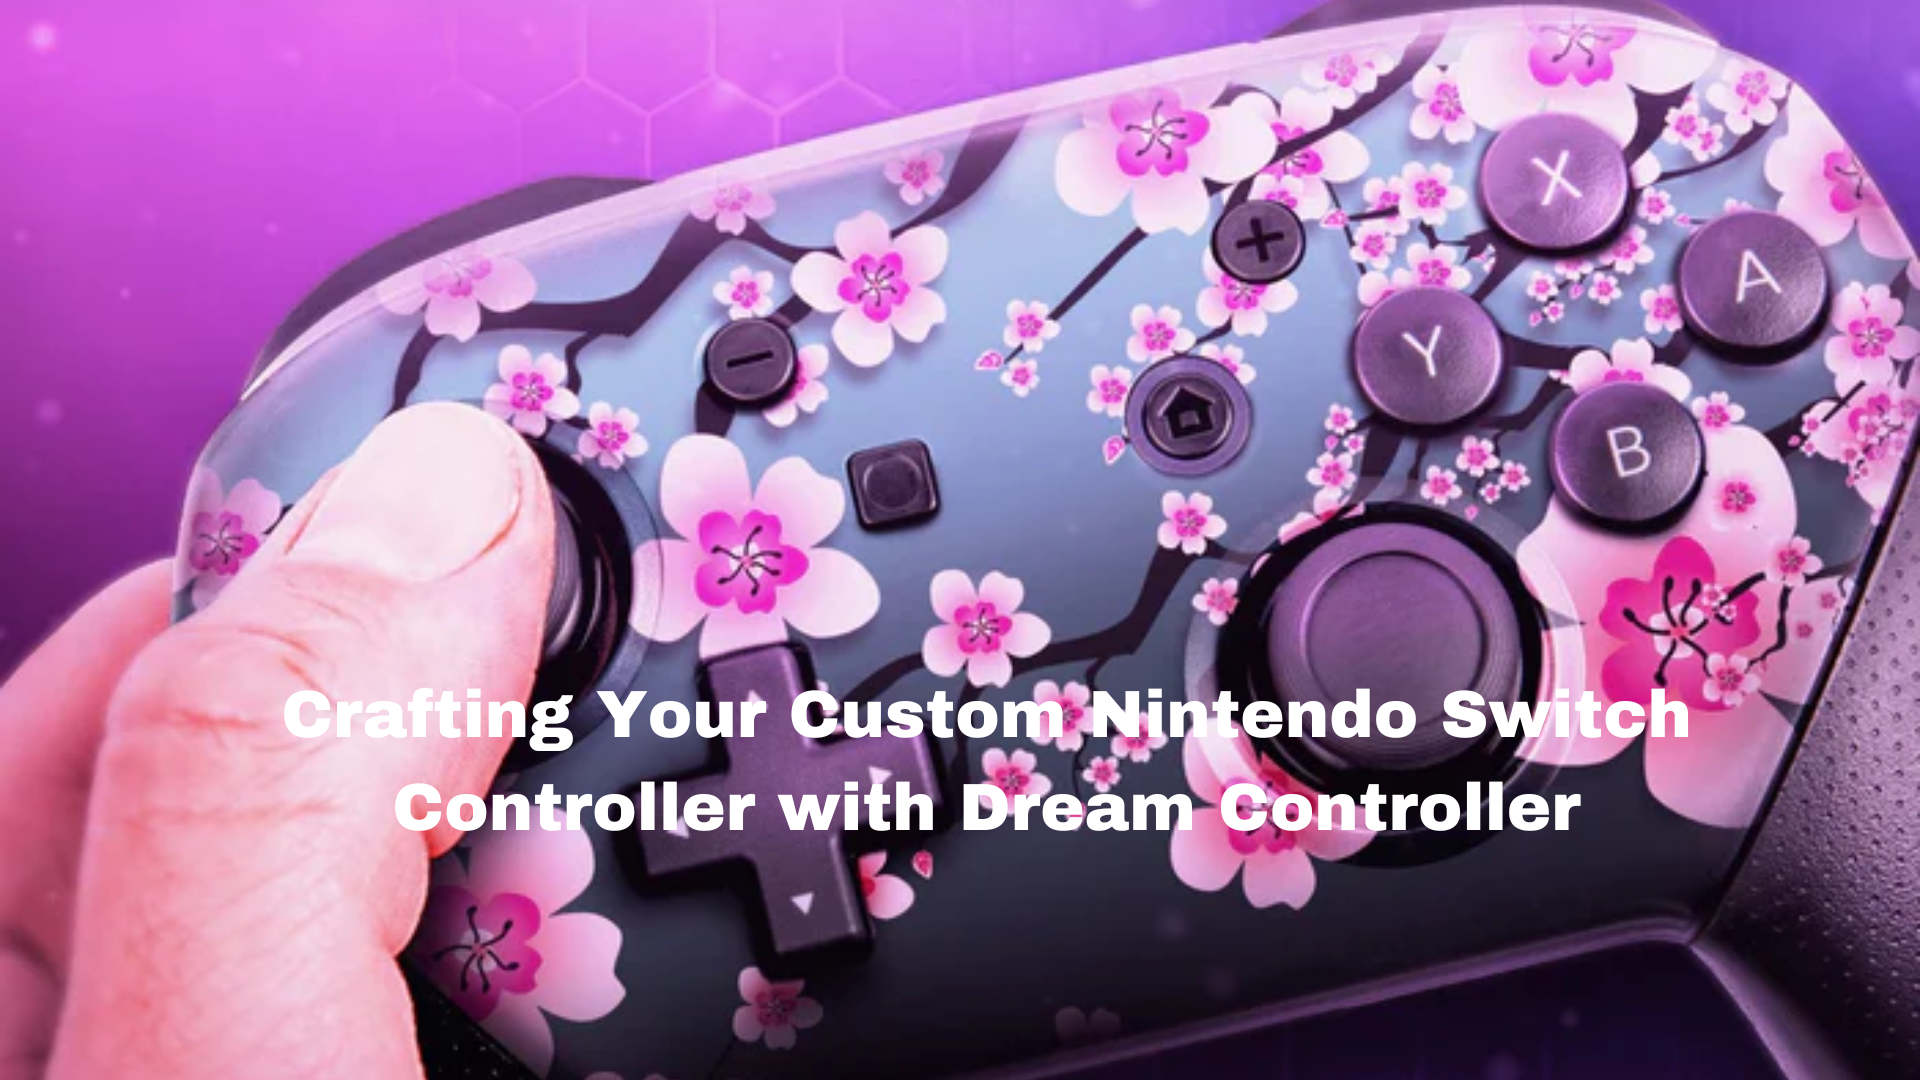 Crafting Your Custom Nintendo Switch Controller with Dream Controller